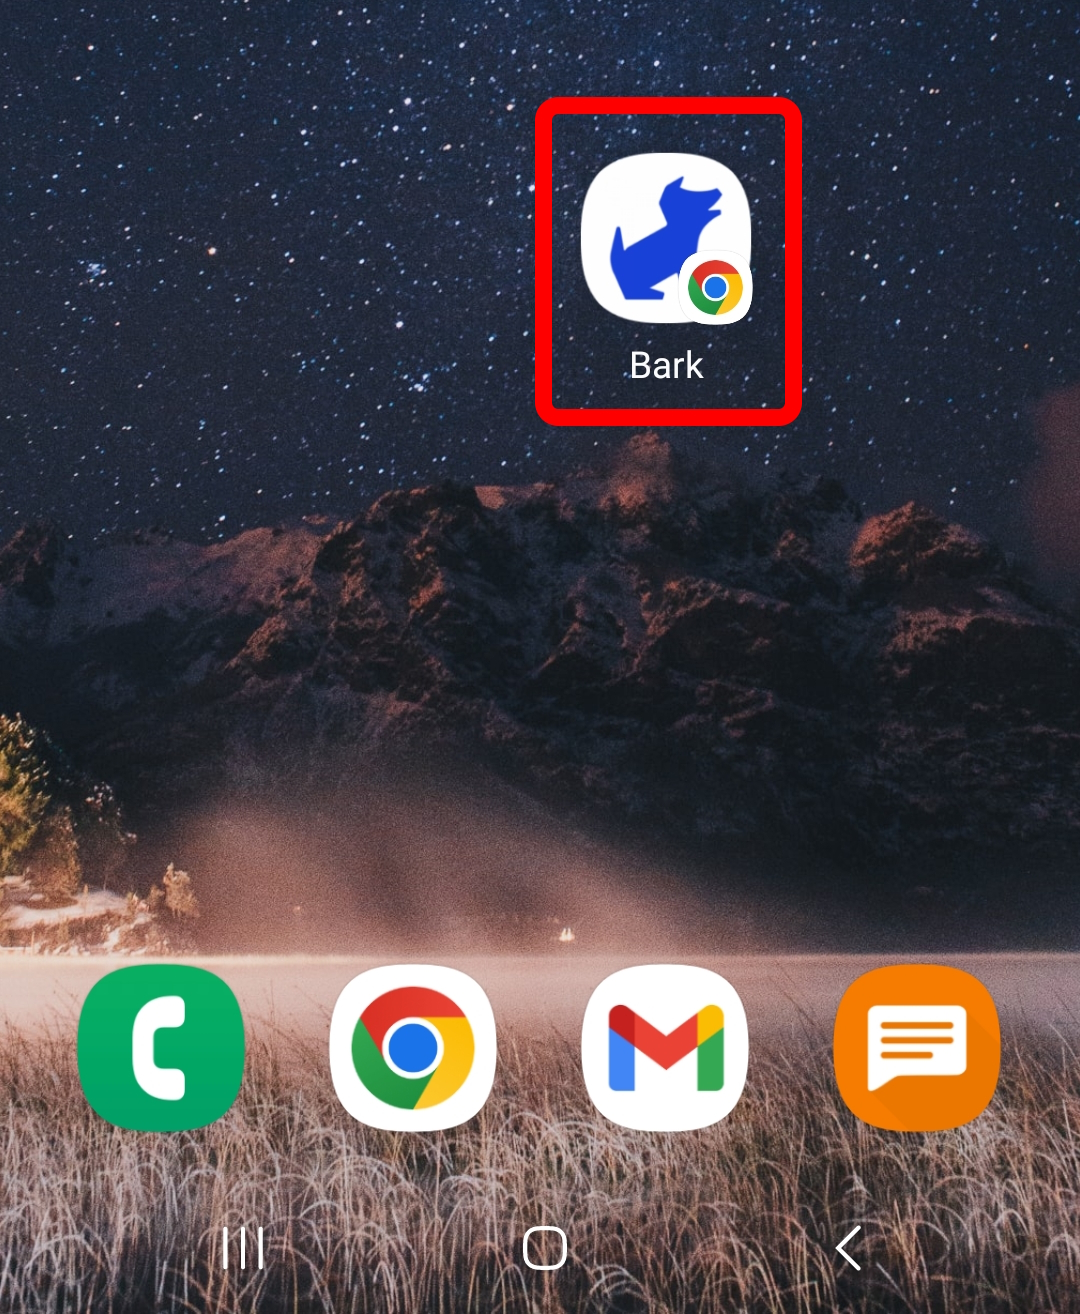 bookmarking bark app on android from chrome 1.jpg